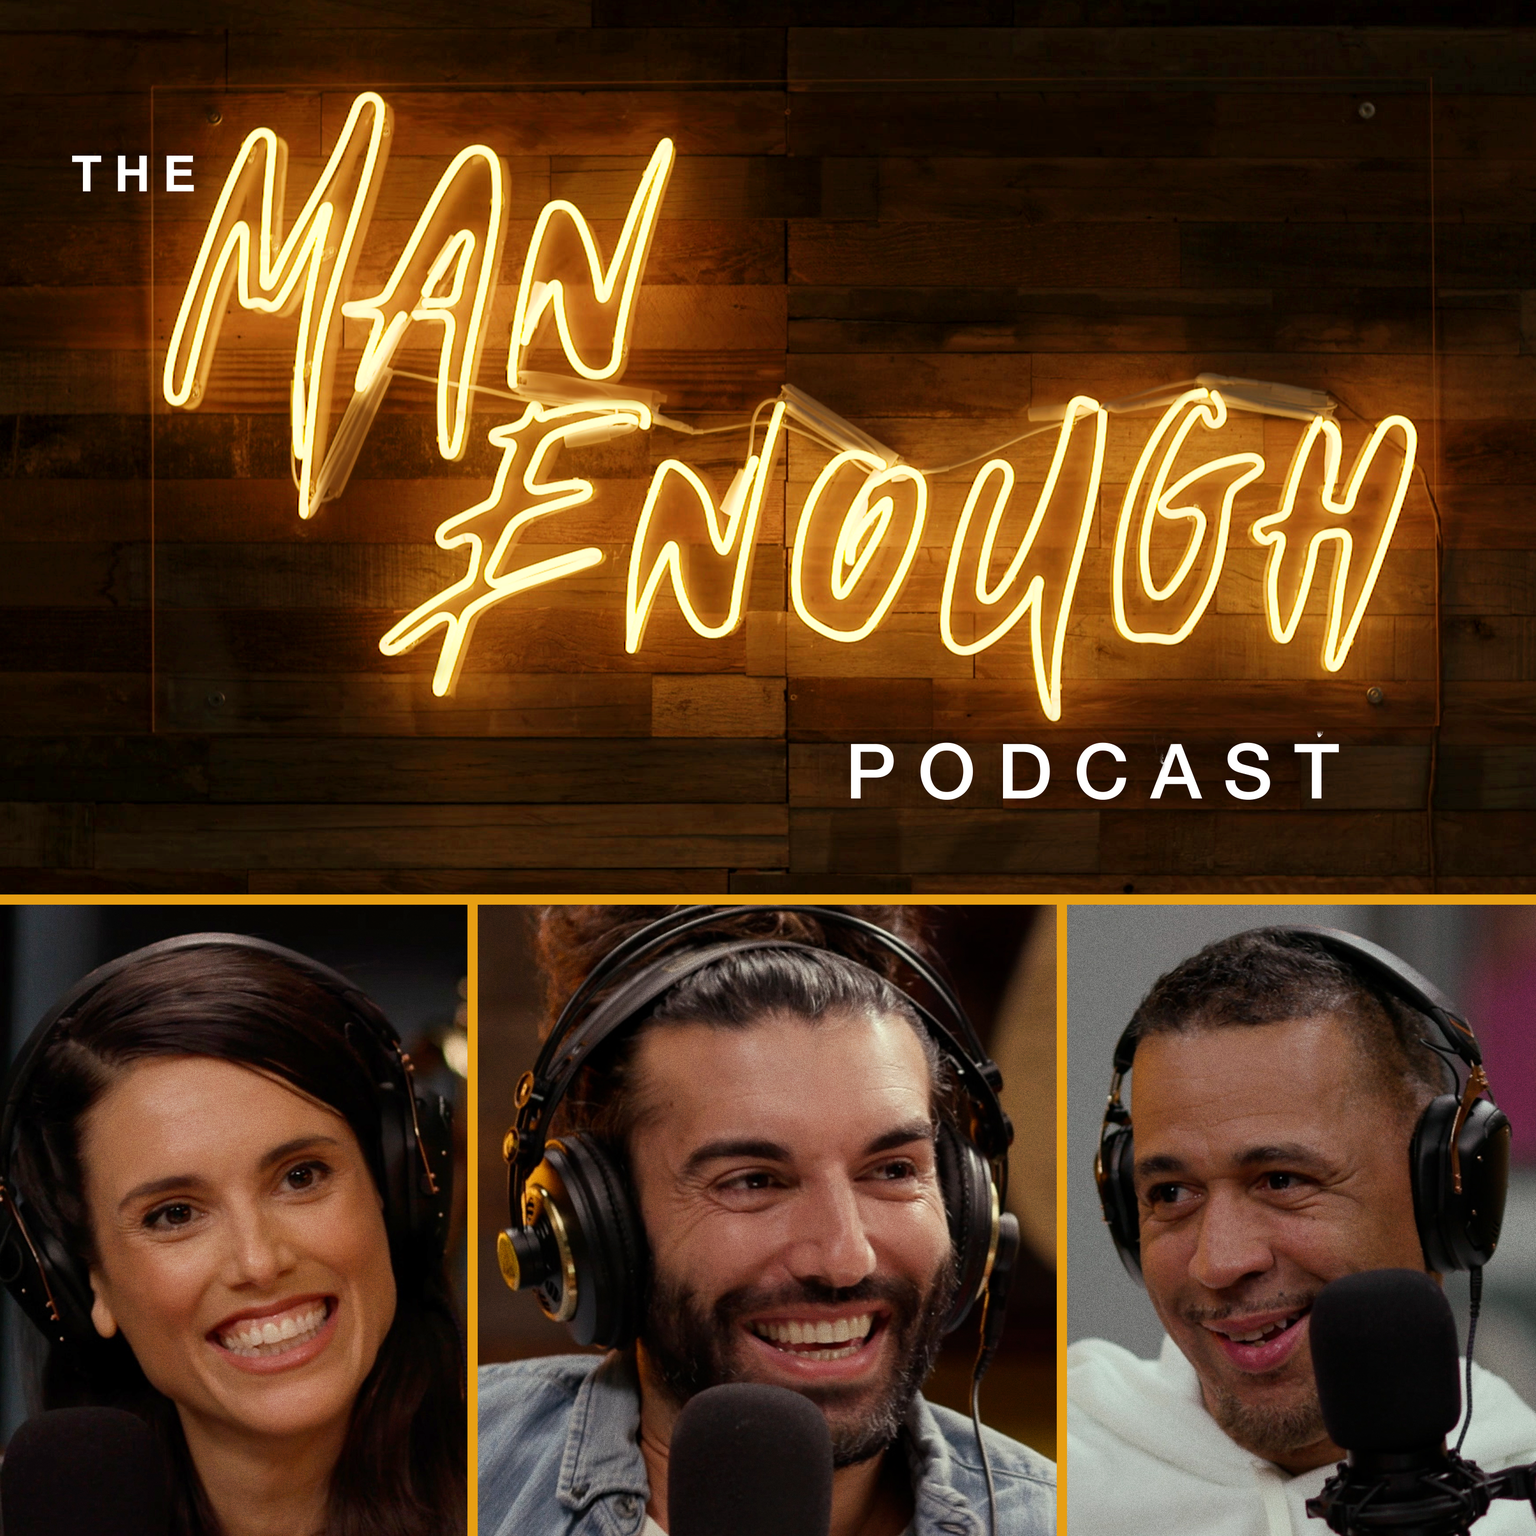 The Too Many Men Podcast: 01.01 - A Week is Long-Term on Apple Podcasts